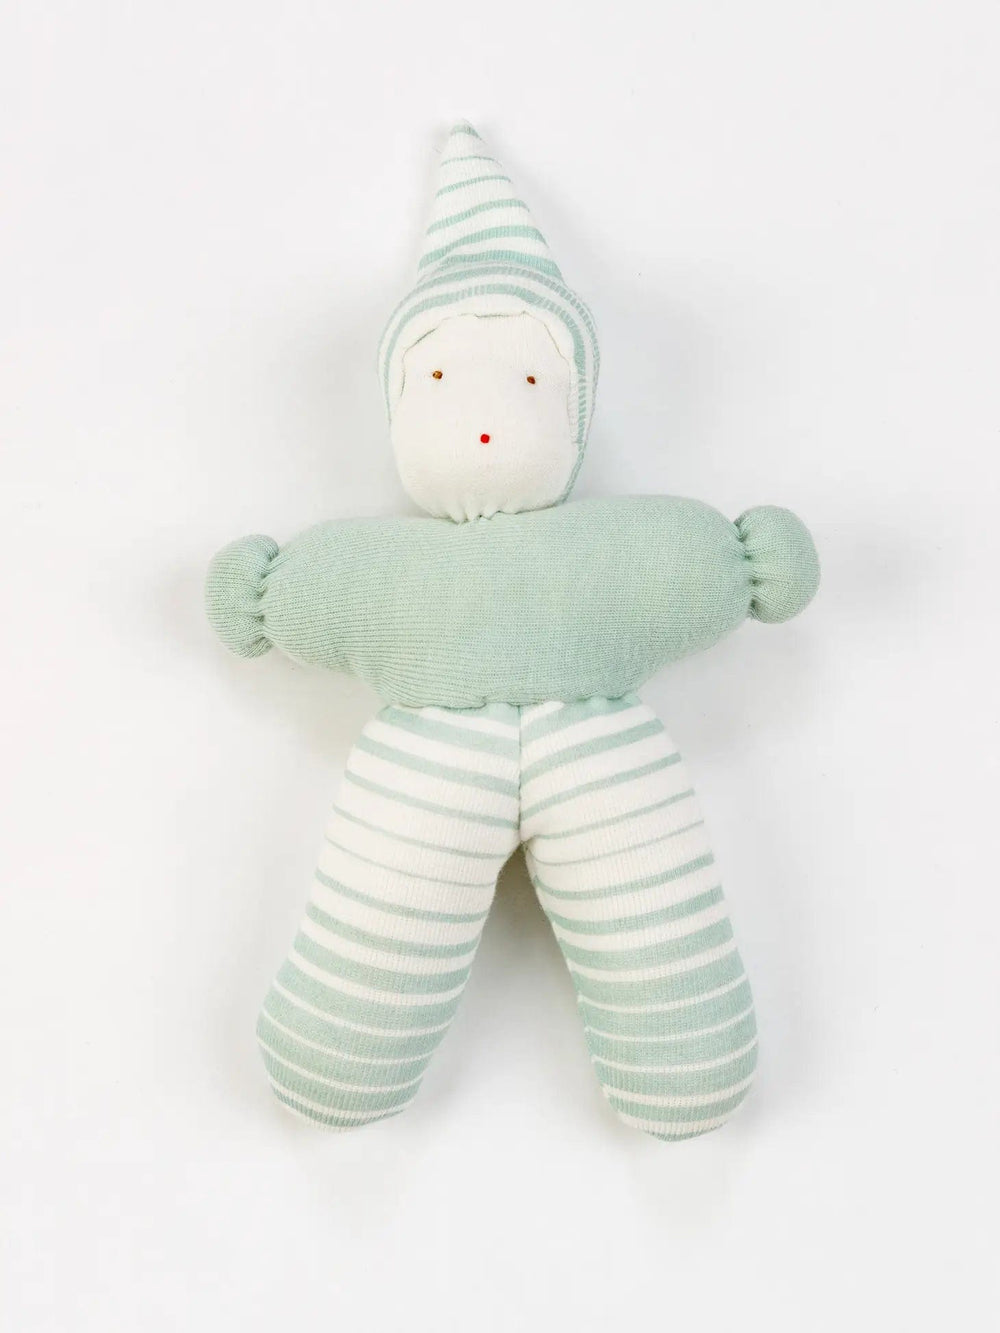 Organic Baby'S First Waldorf Doll - Sea Breeze Stripe Under the Nile Lil Tulips